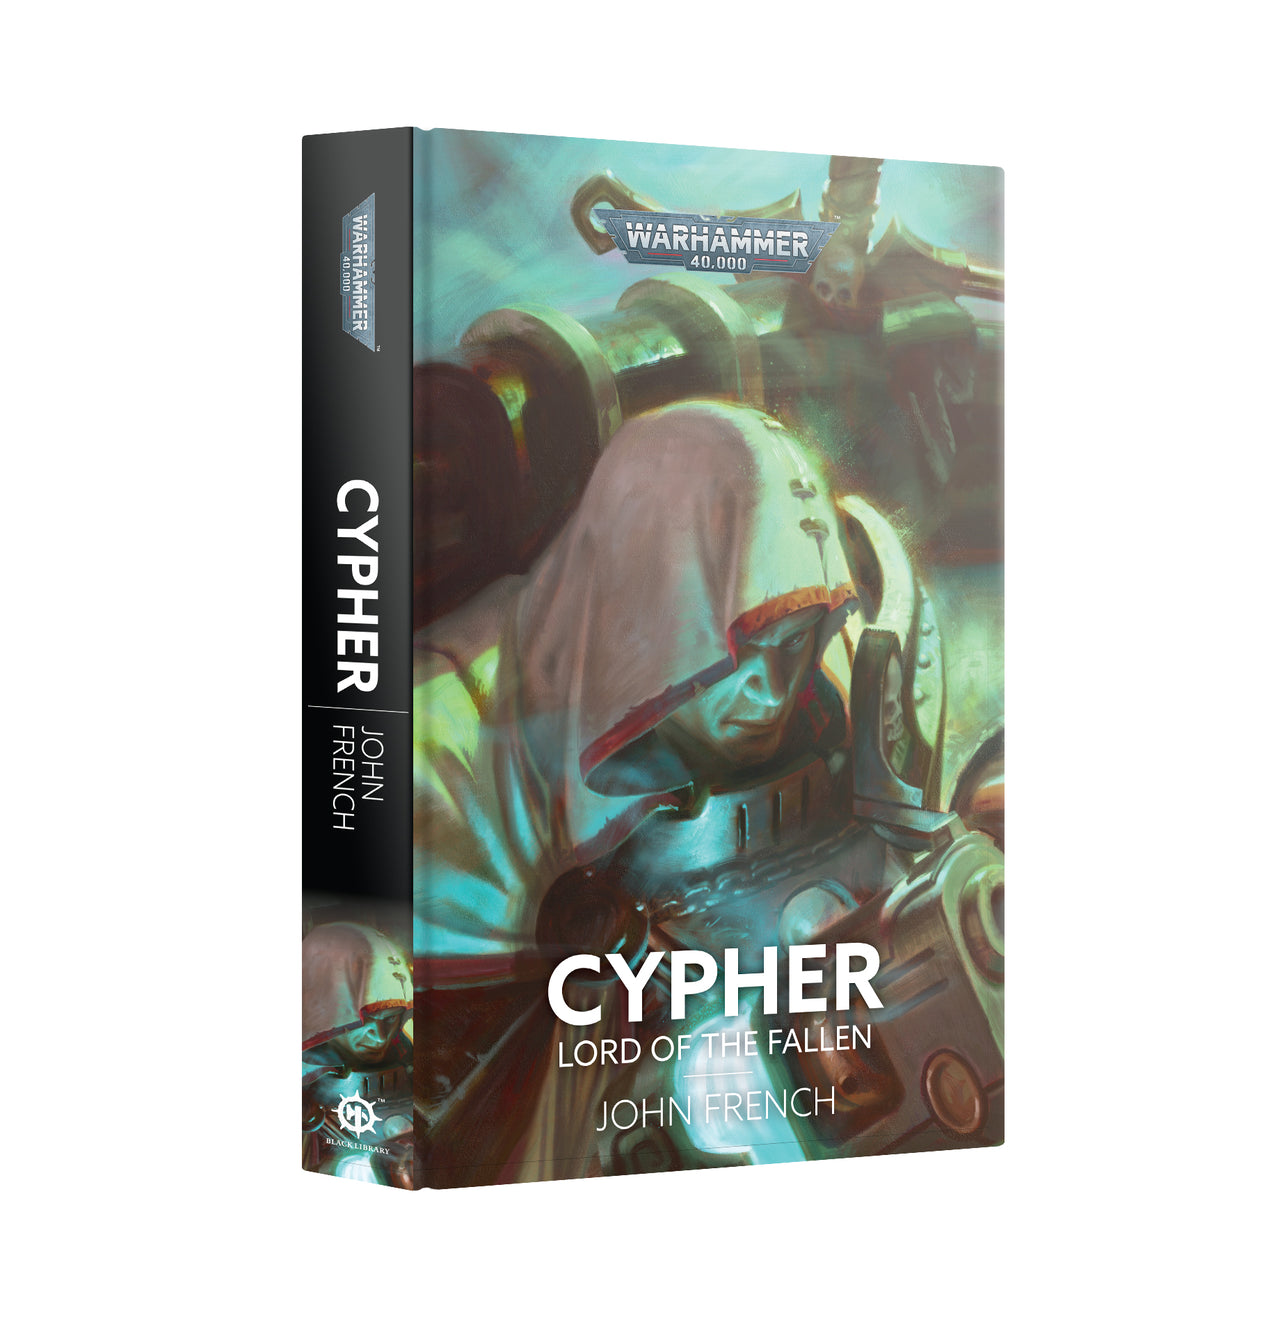 Novel: Cypher Lord of the Fallen (HB)